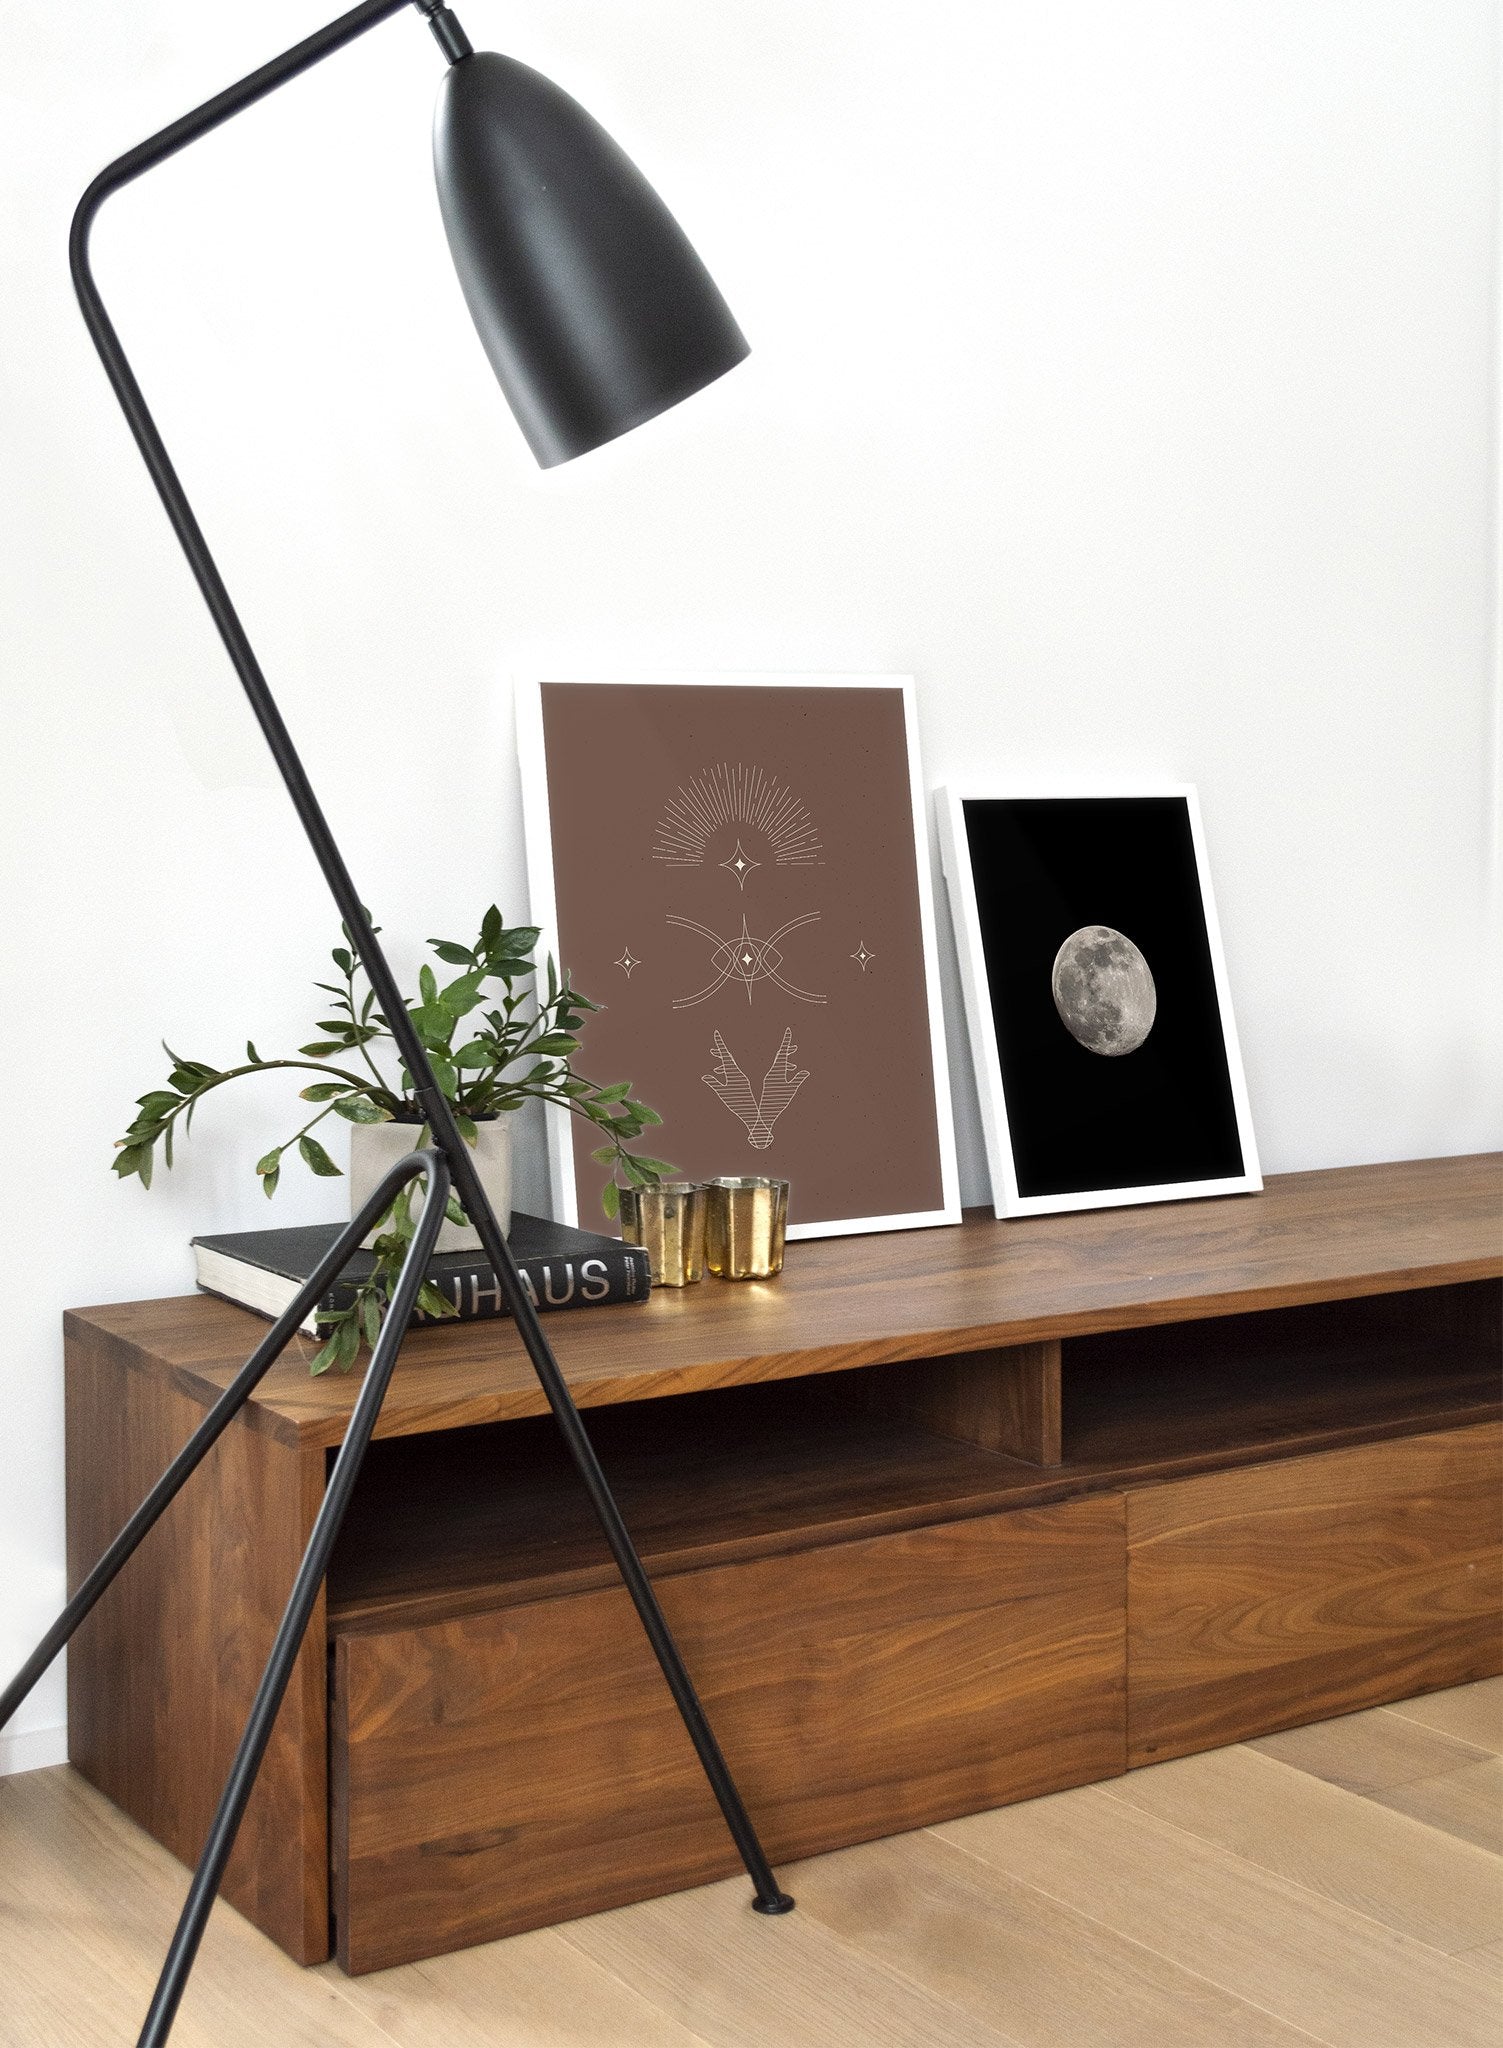 Celestial photography poster by Opposite Wall with bright moon Luna - Lifestyle Duo - Living Room